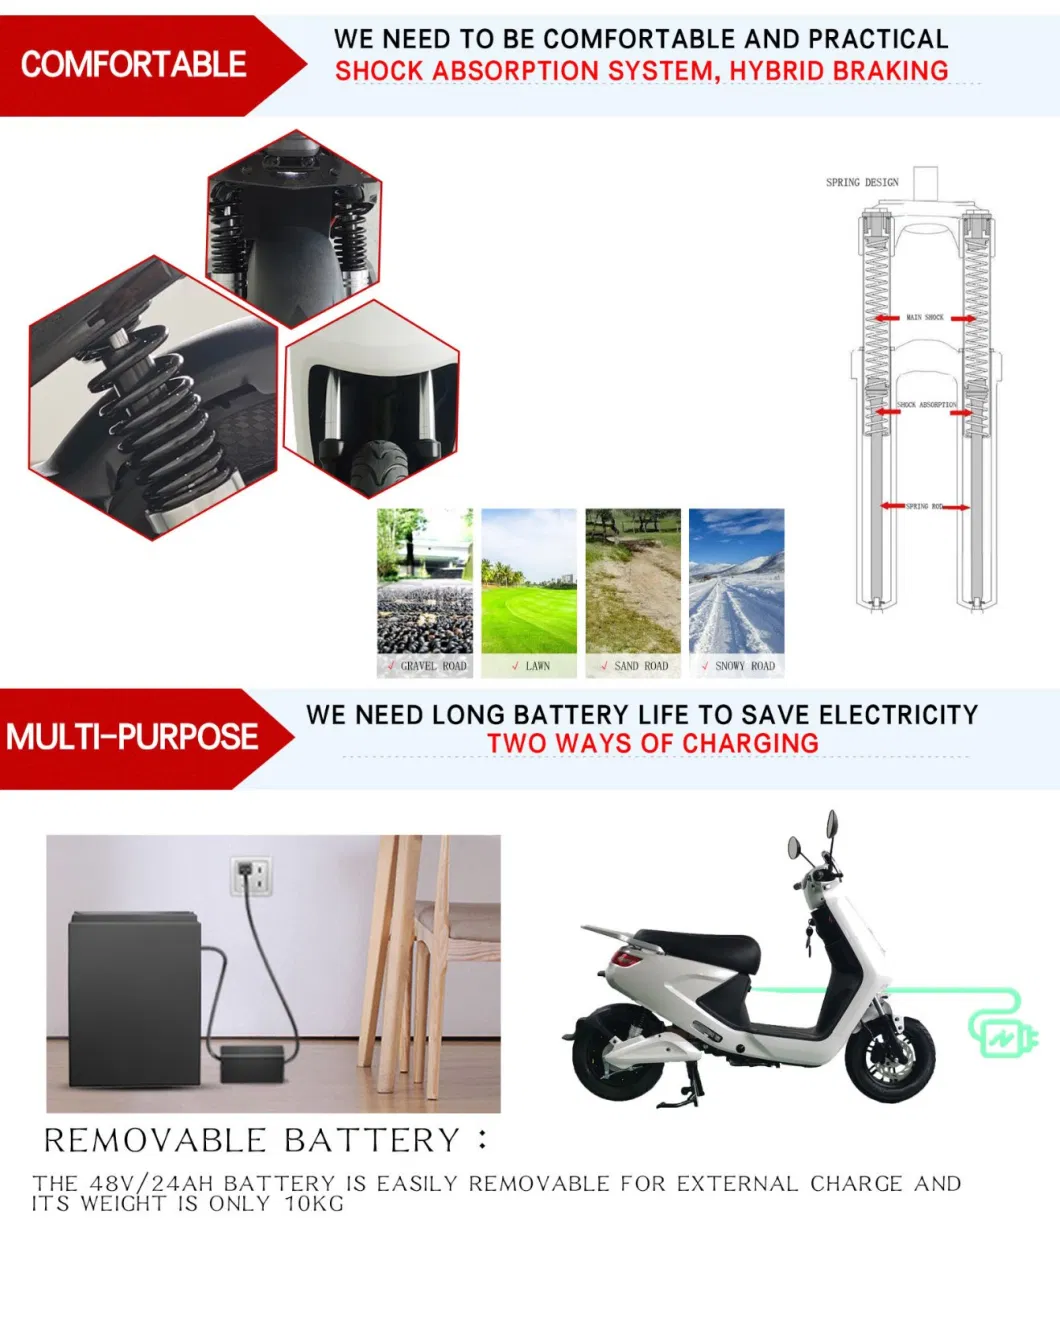 Cheap Price Good Design Best OEM Branding CKD/SKD Adult Electric Moped Motorcycle Scooter Electrical Cycle